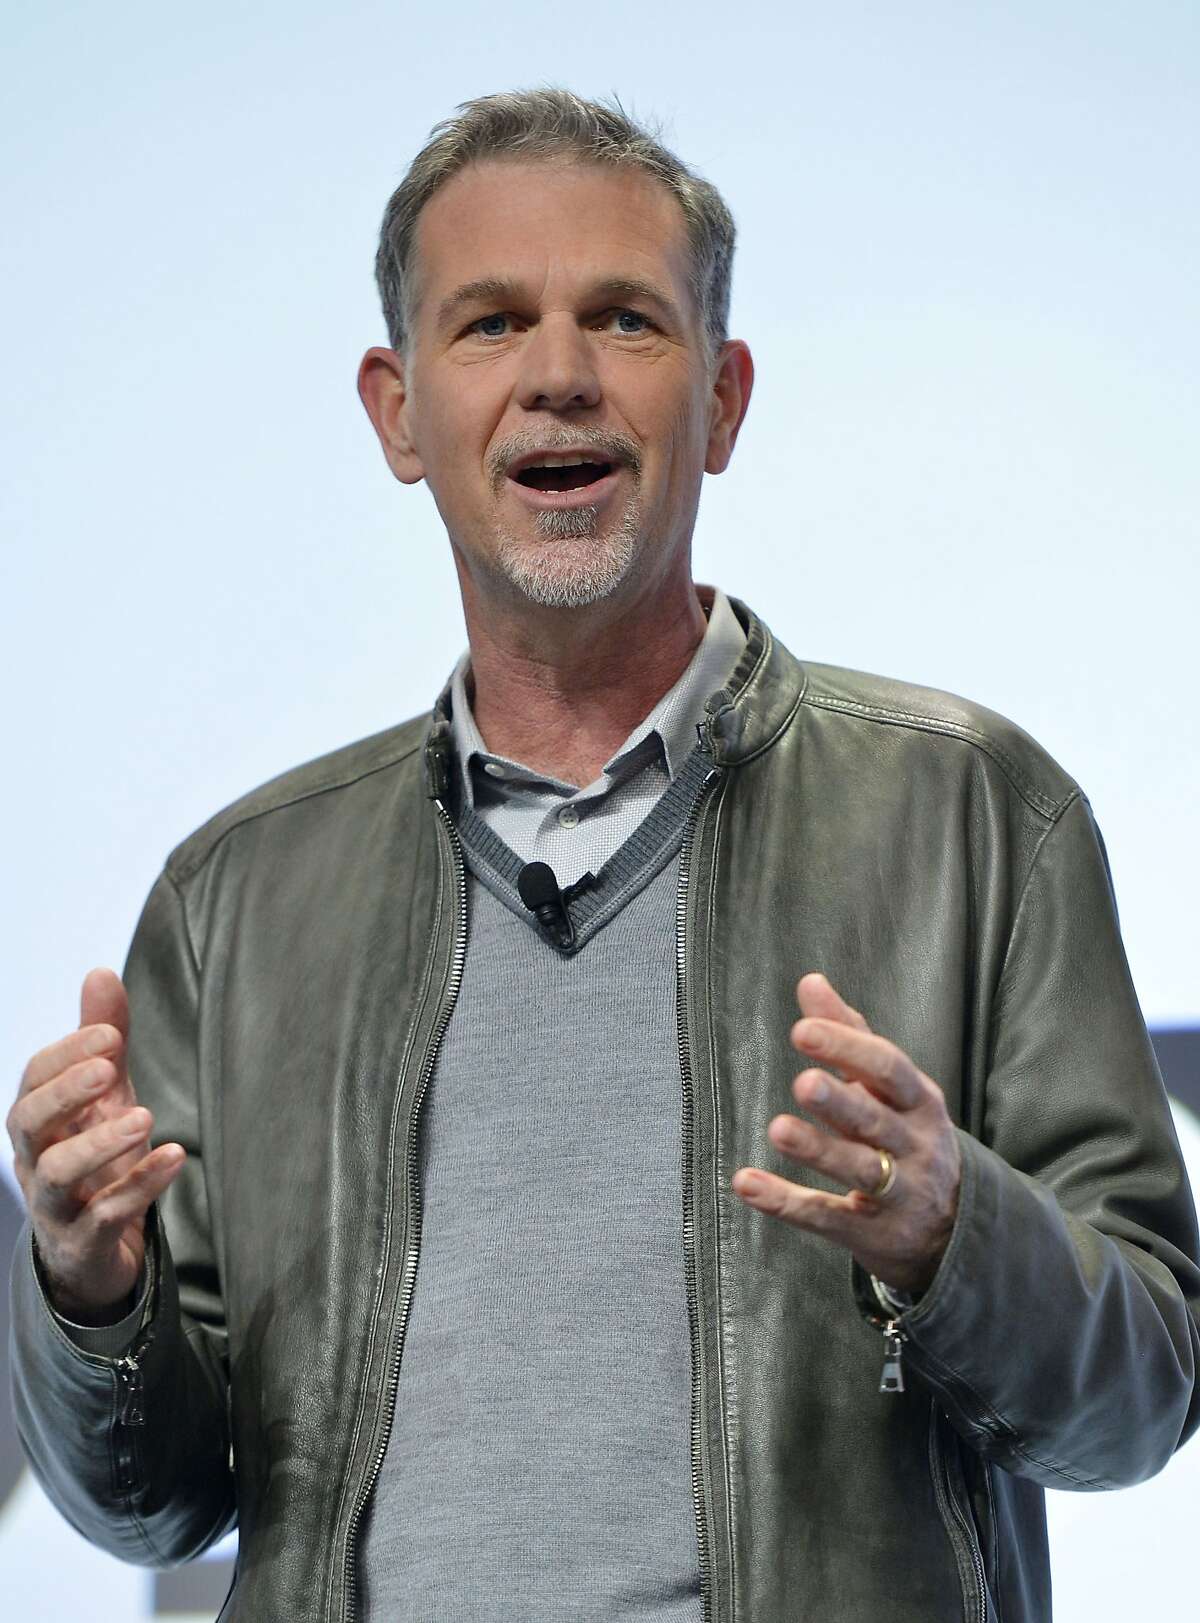 Reed Hastings, chief executive officer of Netflix talks to the media about a new partnership in providing 4K content streaming during the Sony news conference at the International Consumer Electronics Show Monday, Jan. 6, 2014, in Las Vegas. (AP Photo/Jack Dempsey)